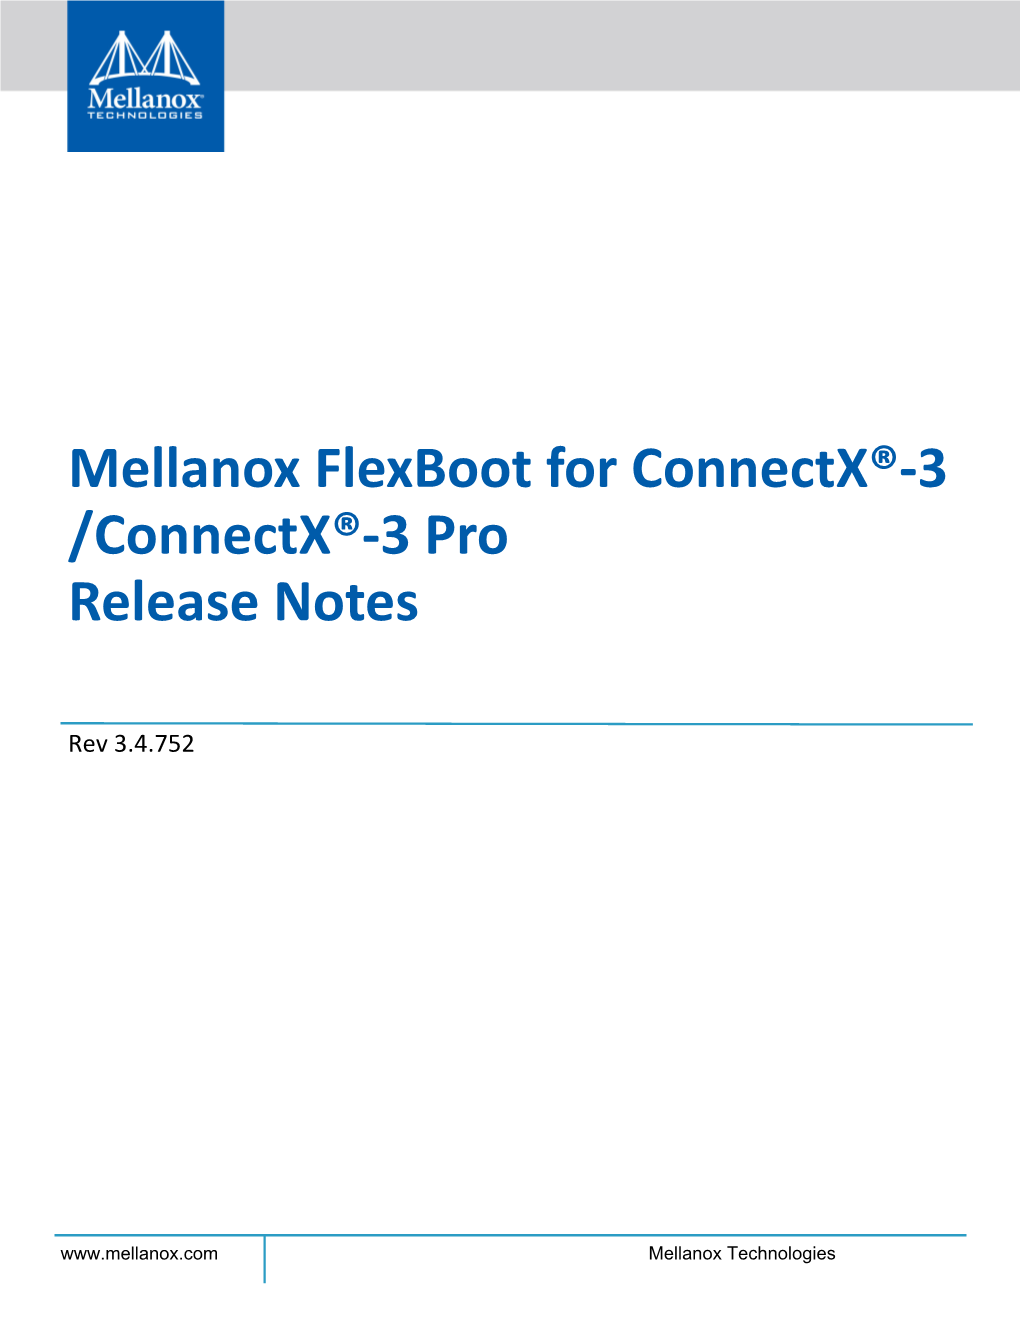 Mellanox Flexboot for Connectx®-3 /Connectx®-3 Pro Release Notes